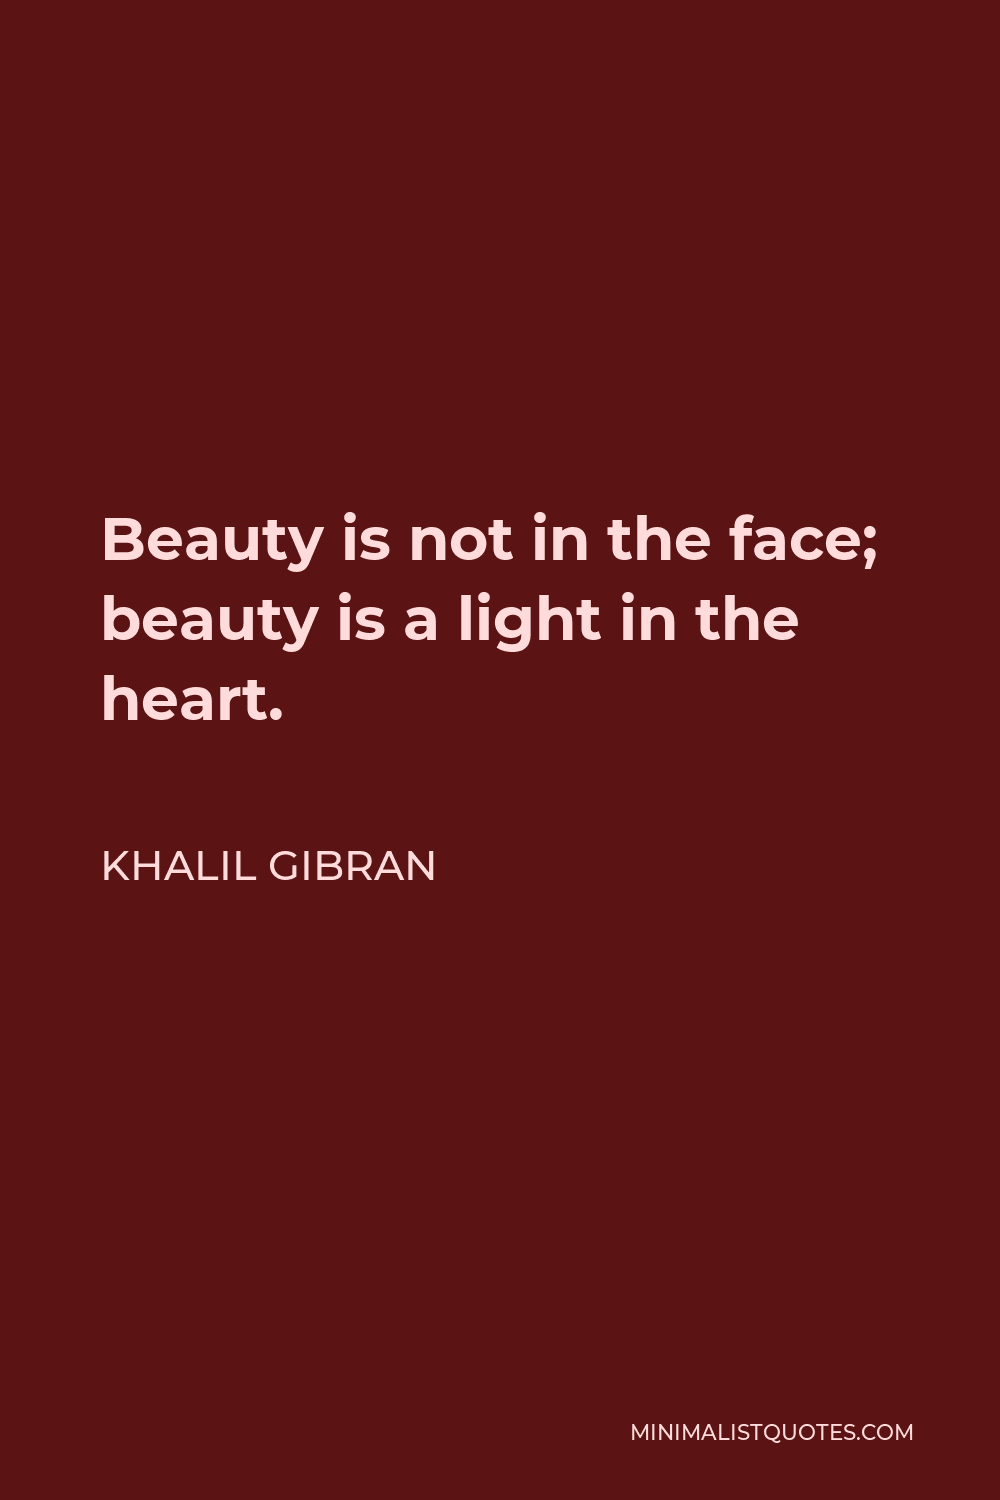 Khalil Gibran Quote - Beauty is not in the face; beauty is a light in the heart.